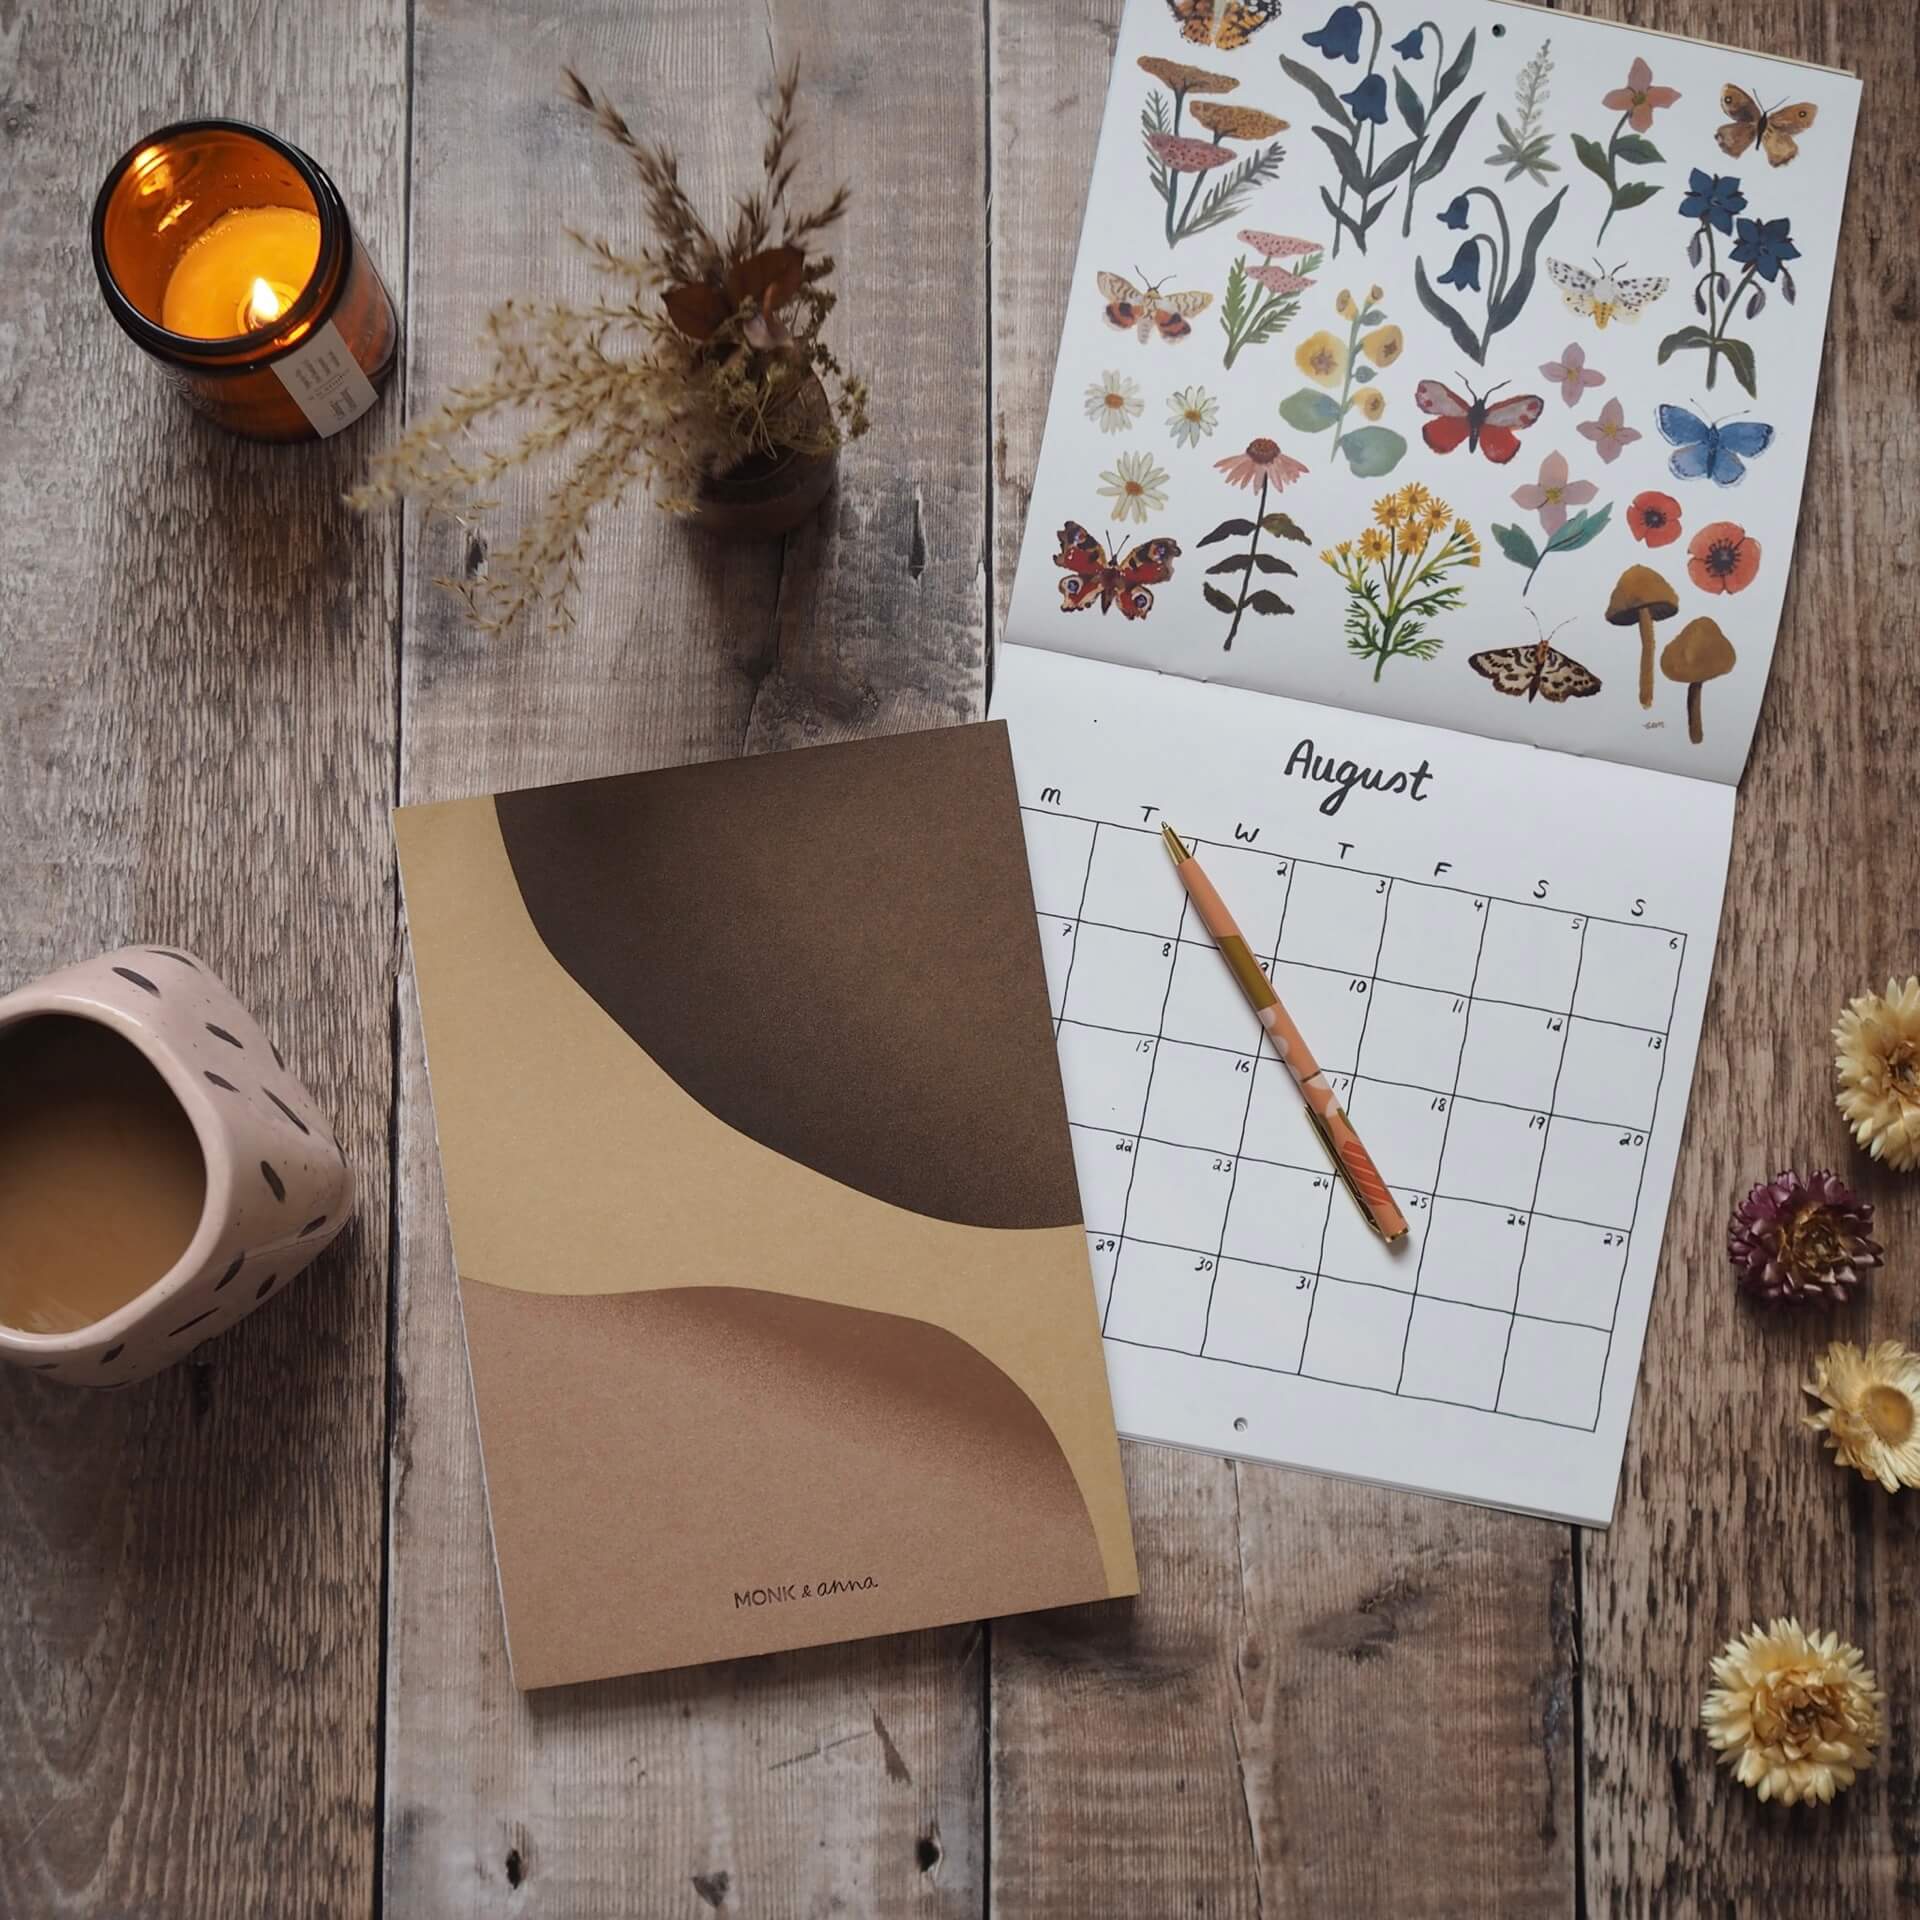 Email marketing tips from 91 Magazine - planning flatlay, with notebook and pen and calendar. 